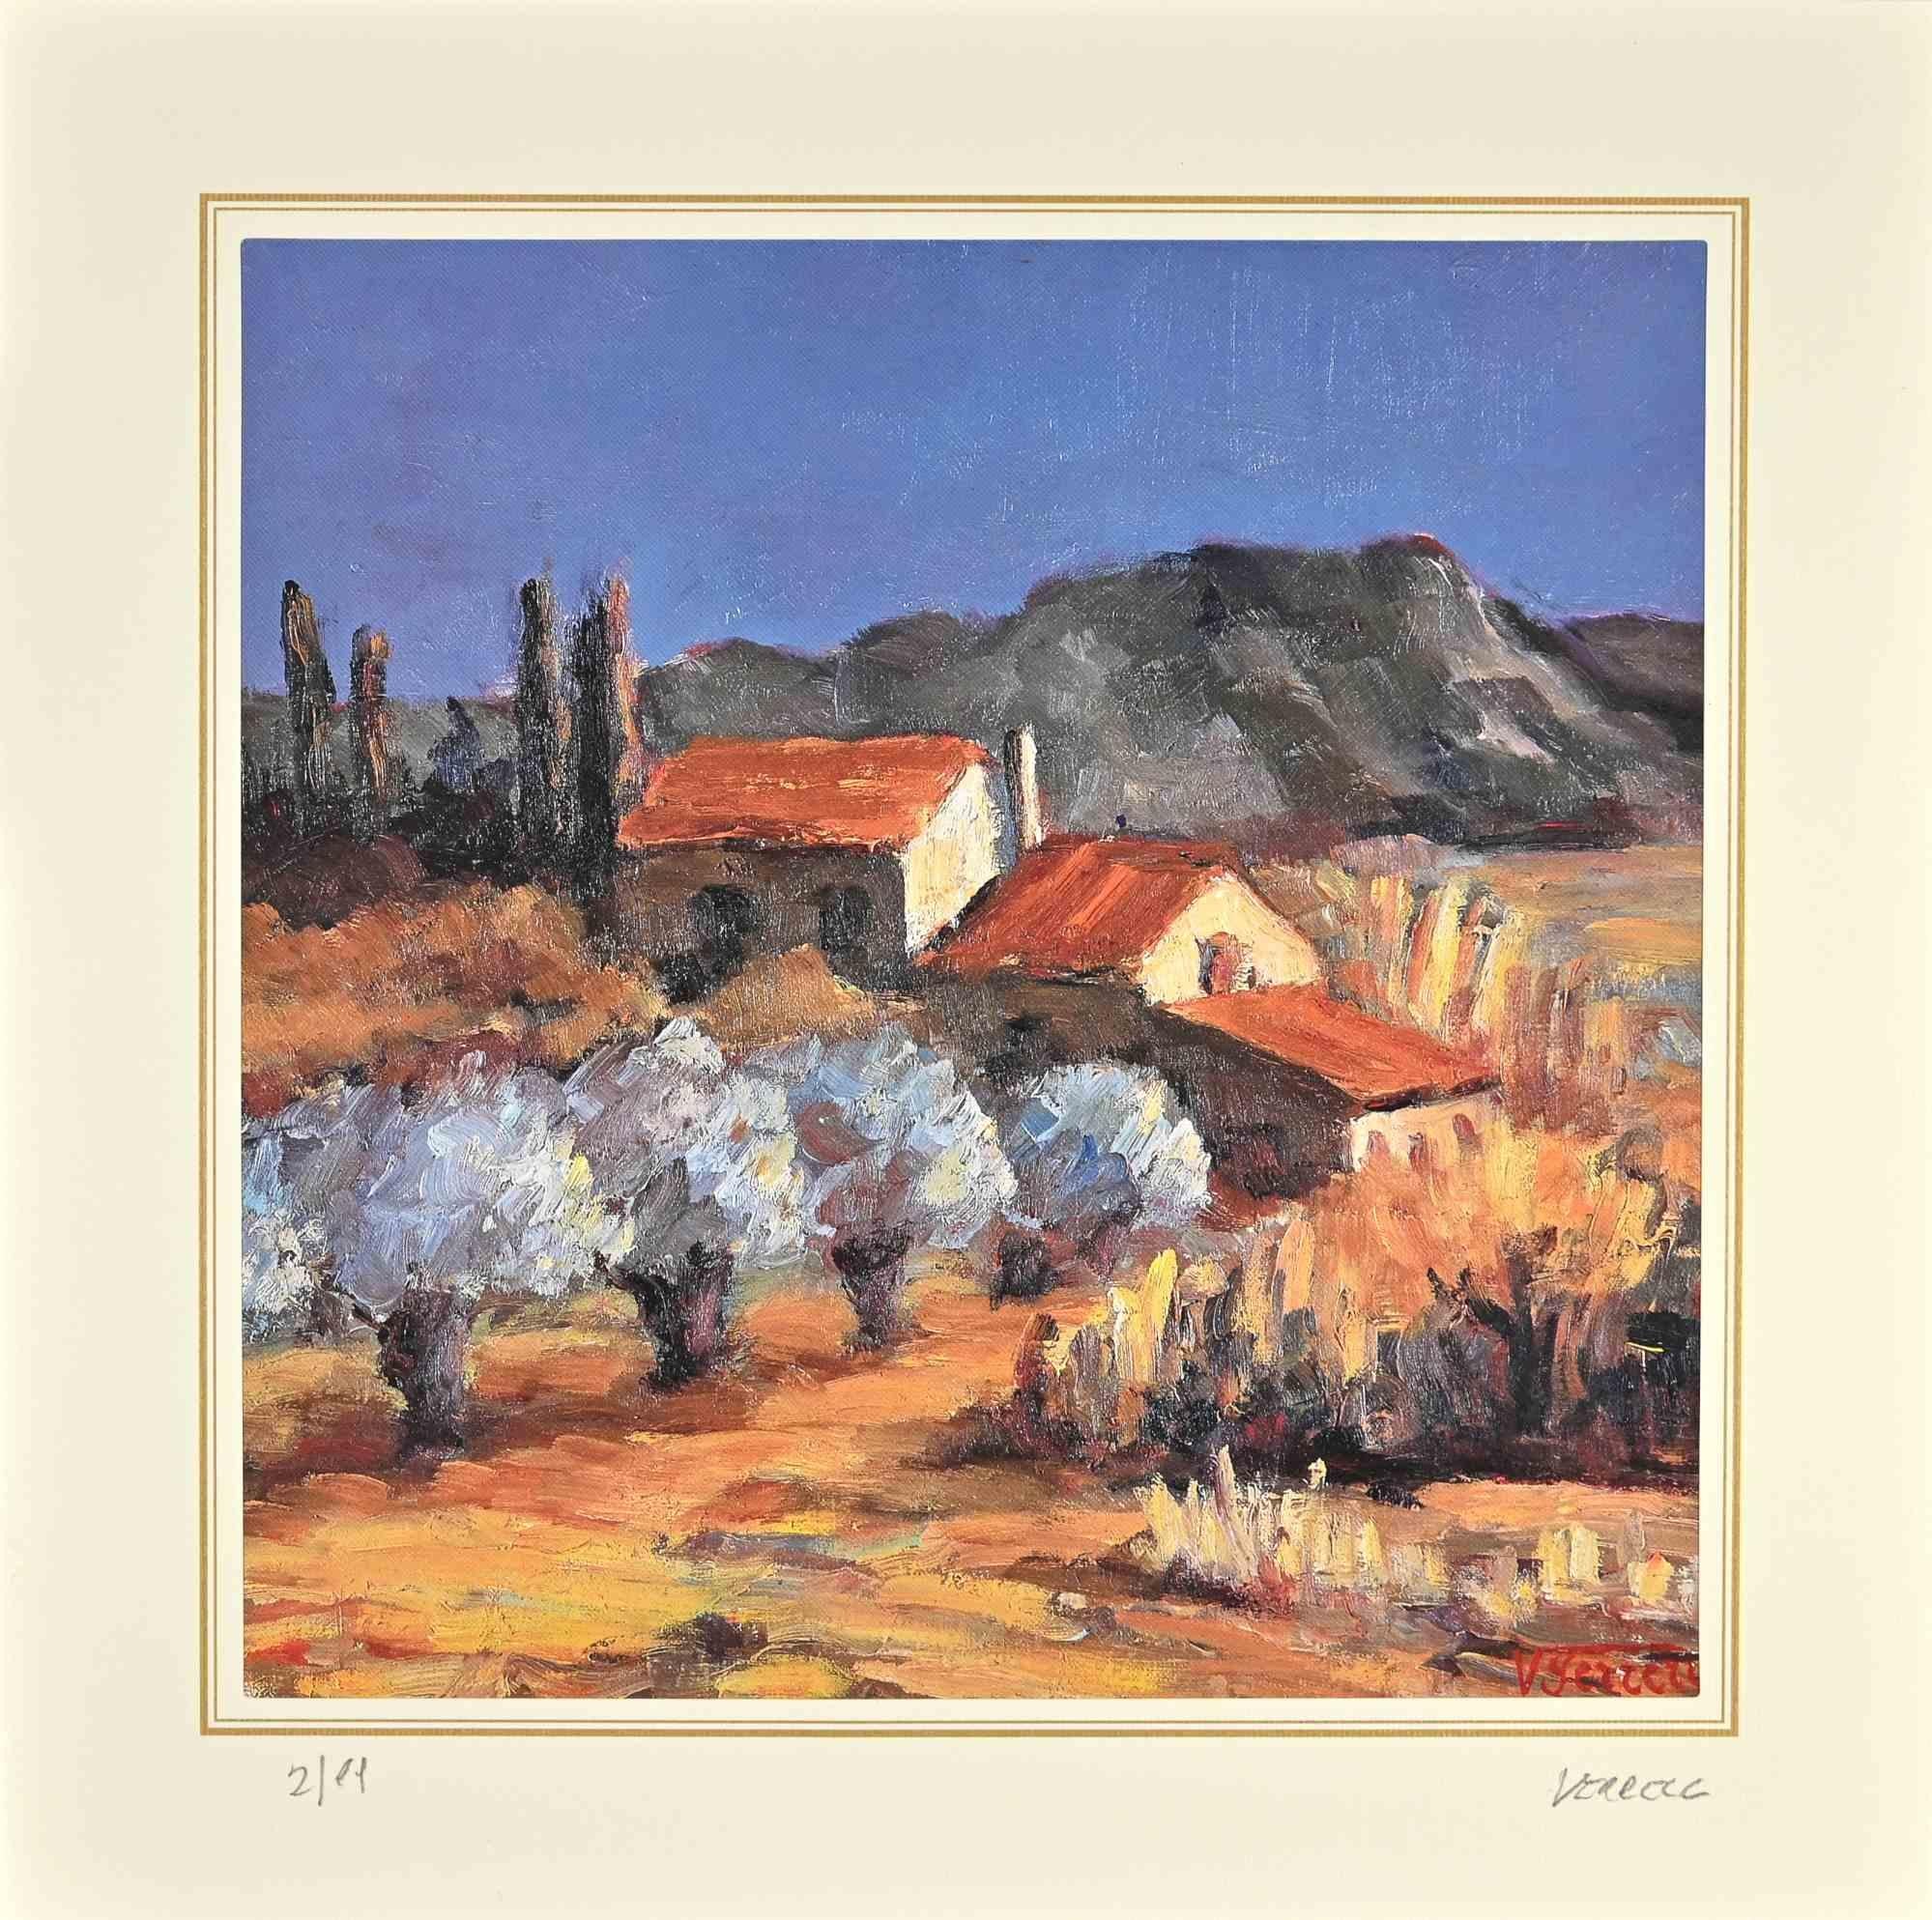 Landscape is a lithograph attributed to Nicholas Verrall (1945)  in the Late 20th Century.

Hand-signed on the right corner. Numbered, Edition, 2/99, on the left margin. On the back is the label of the certificate of  authenticity.

The artwork is